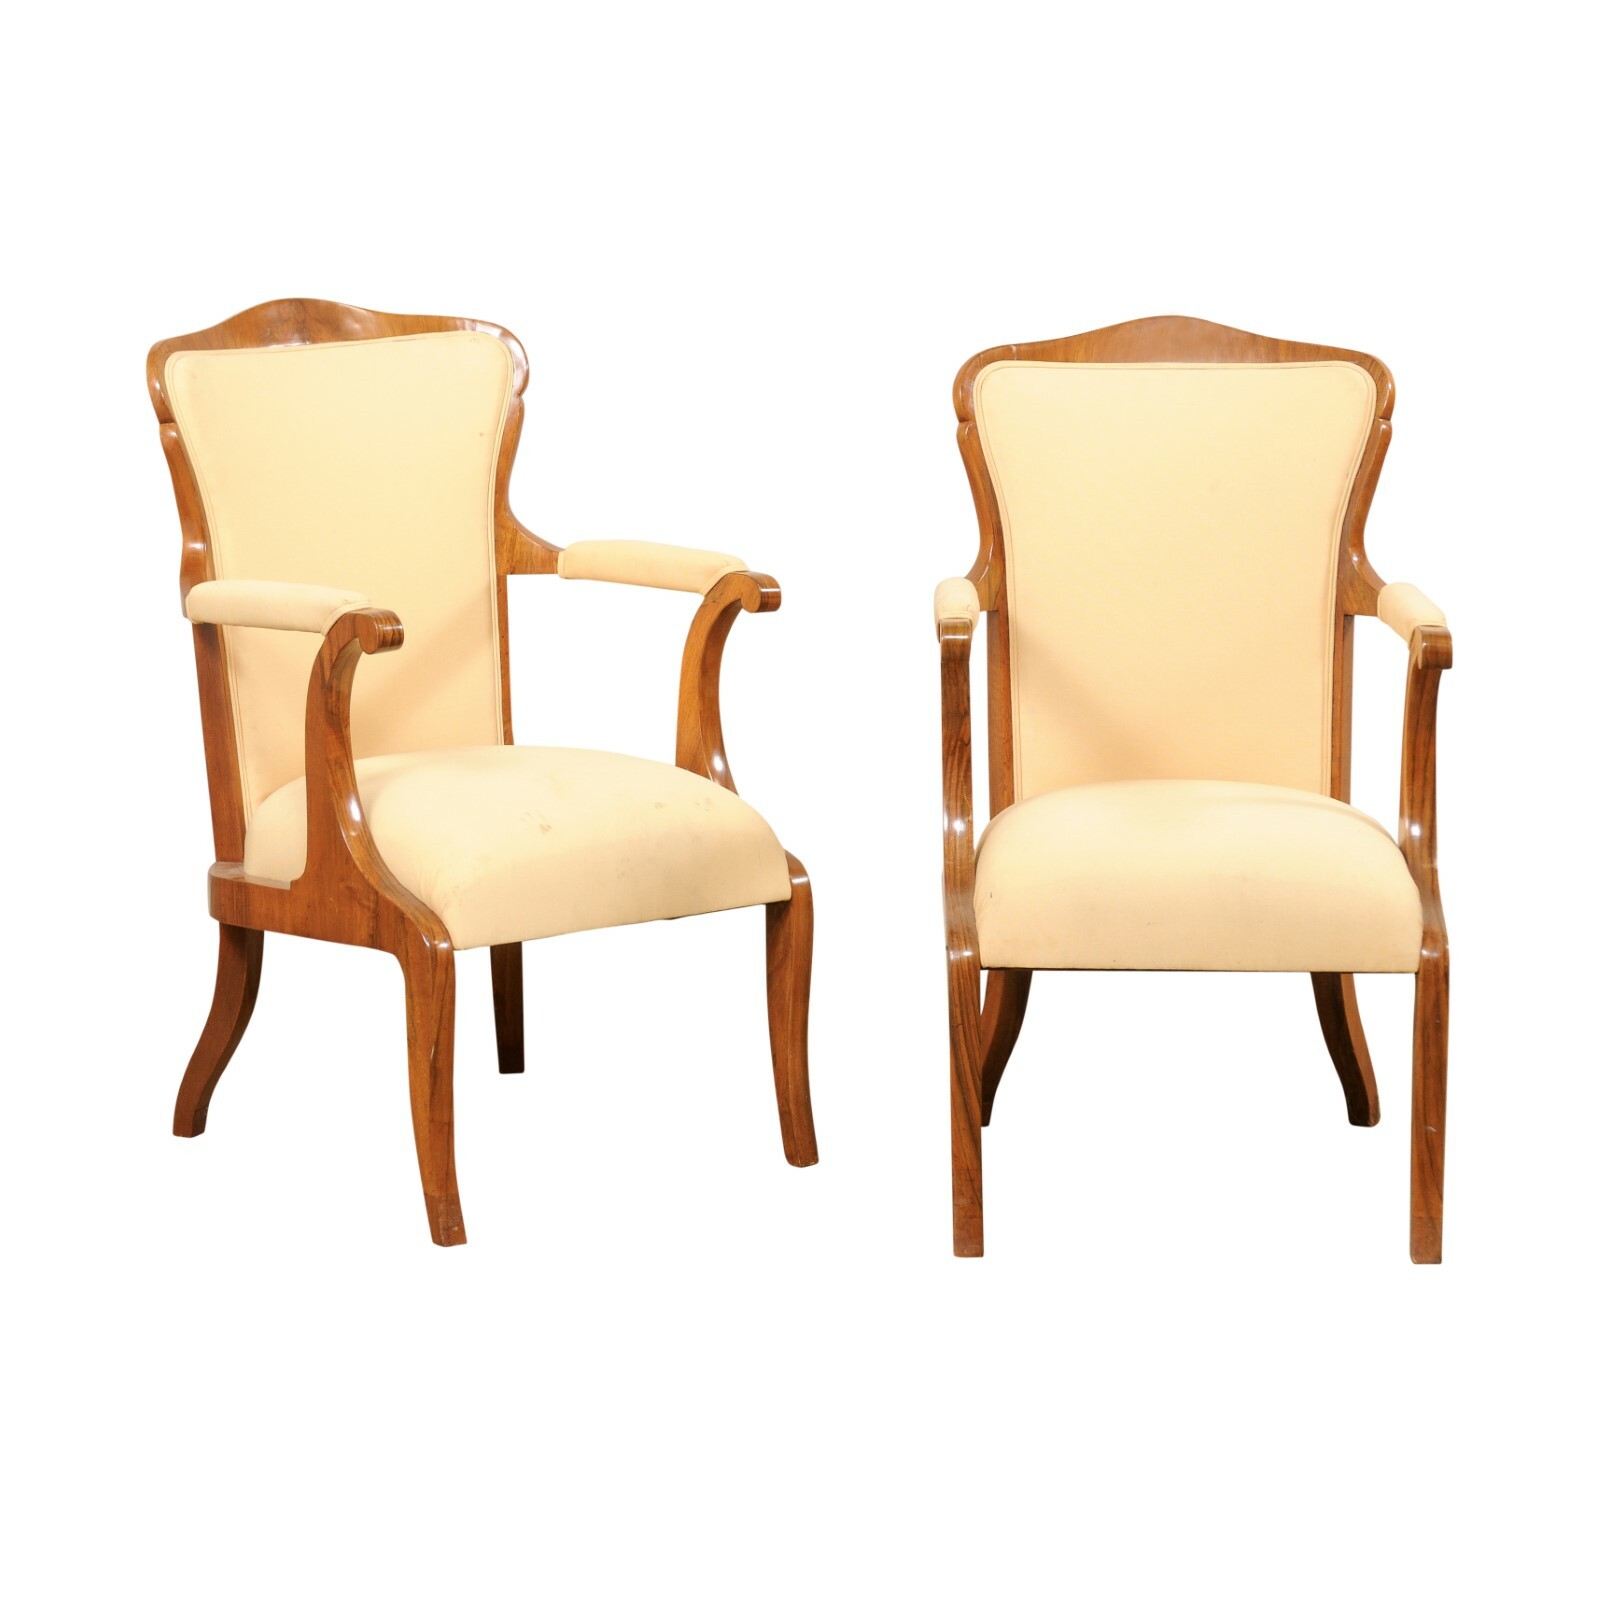 French Pair Fauteuils, Early to Mid 20th C.